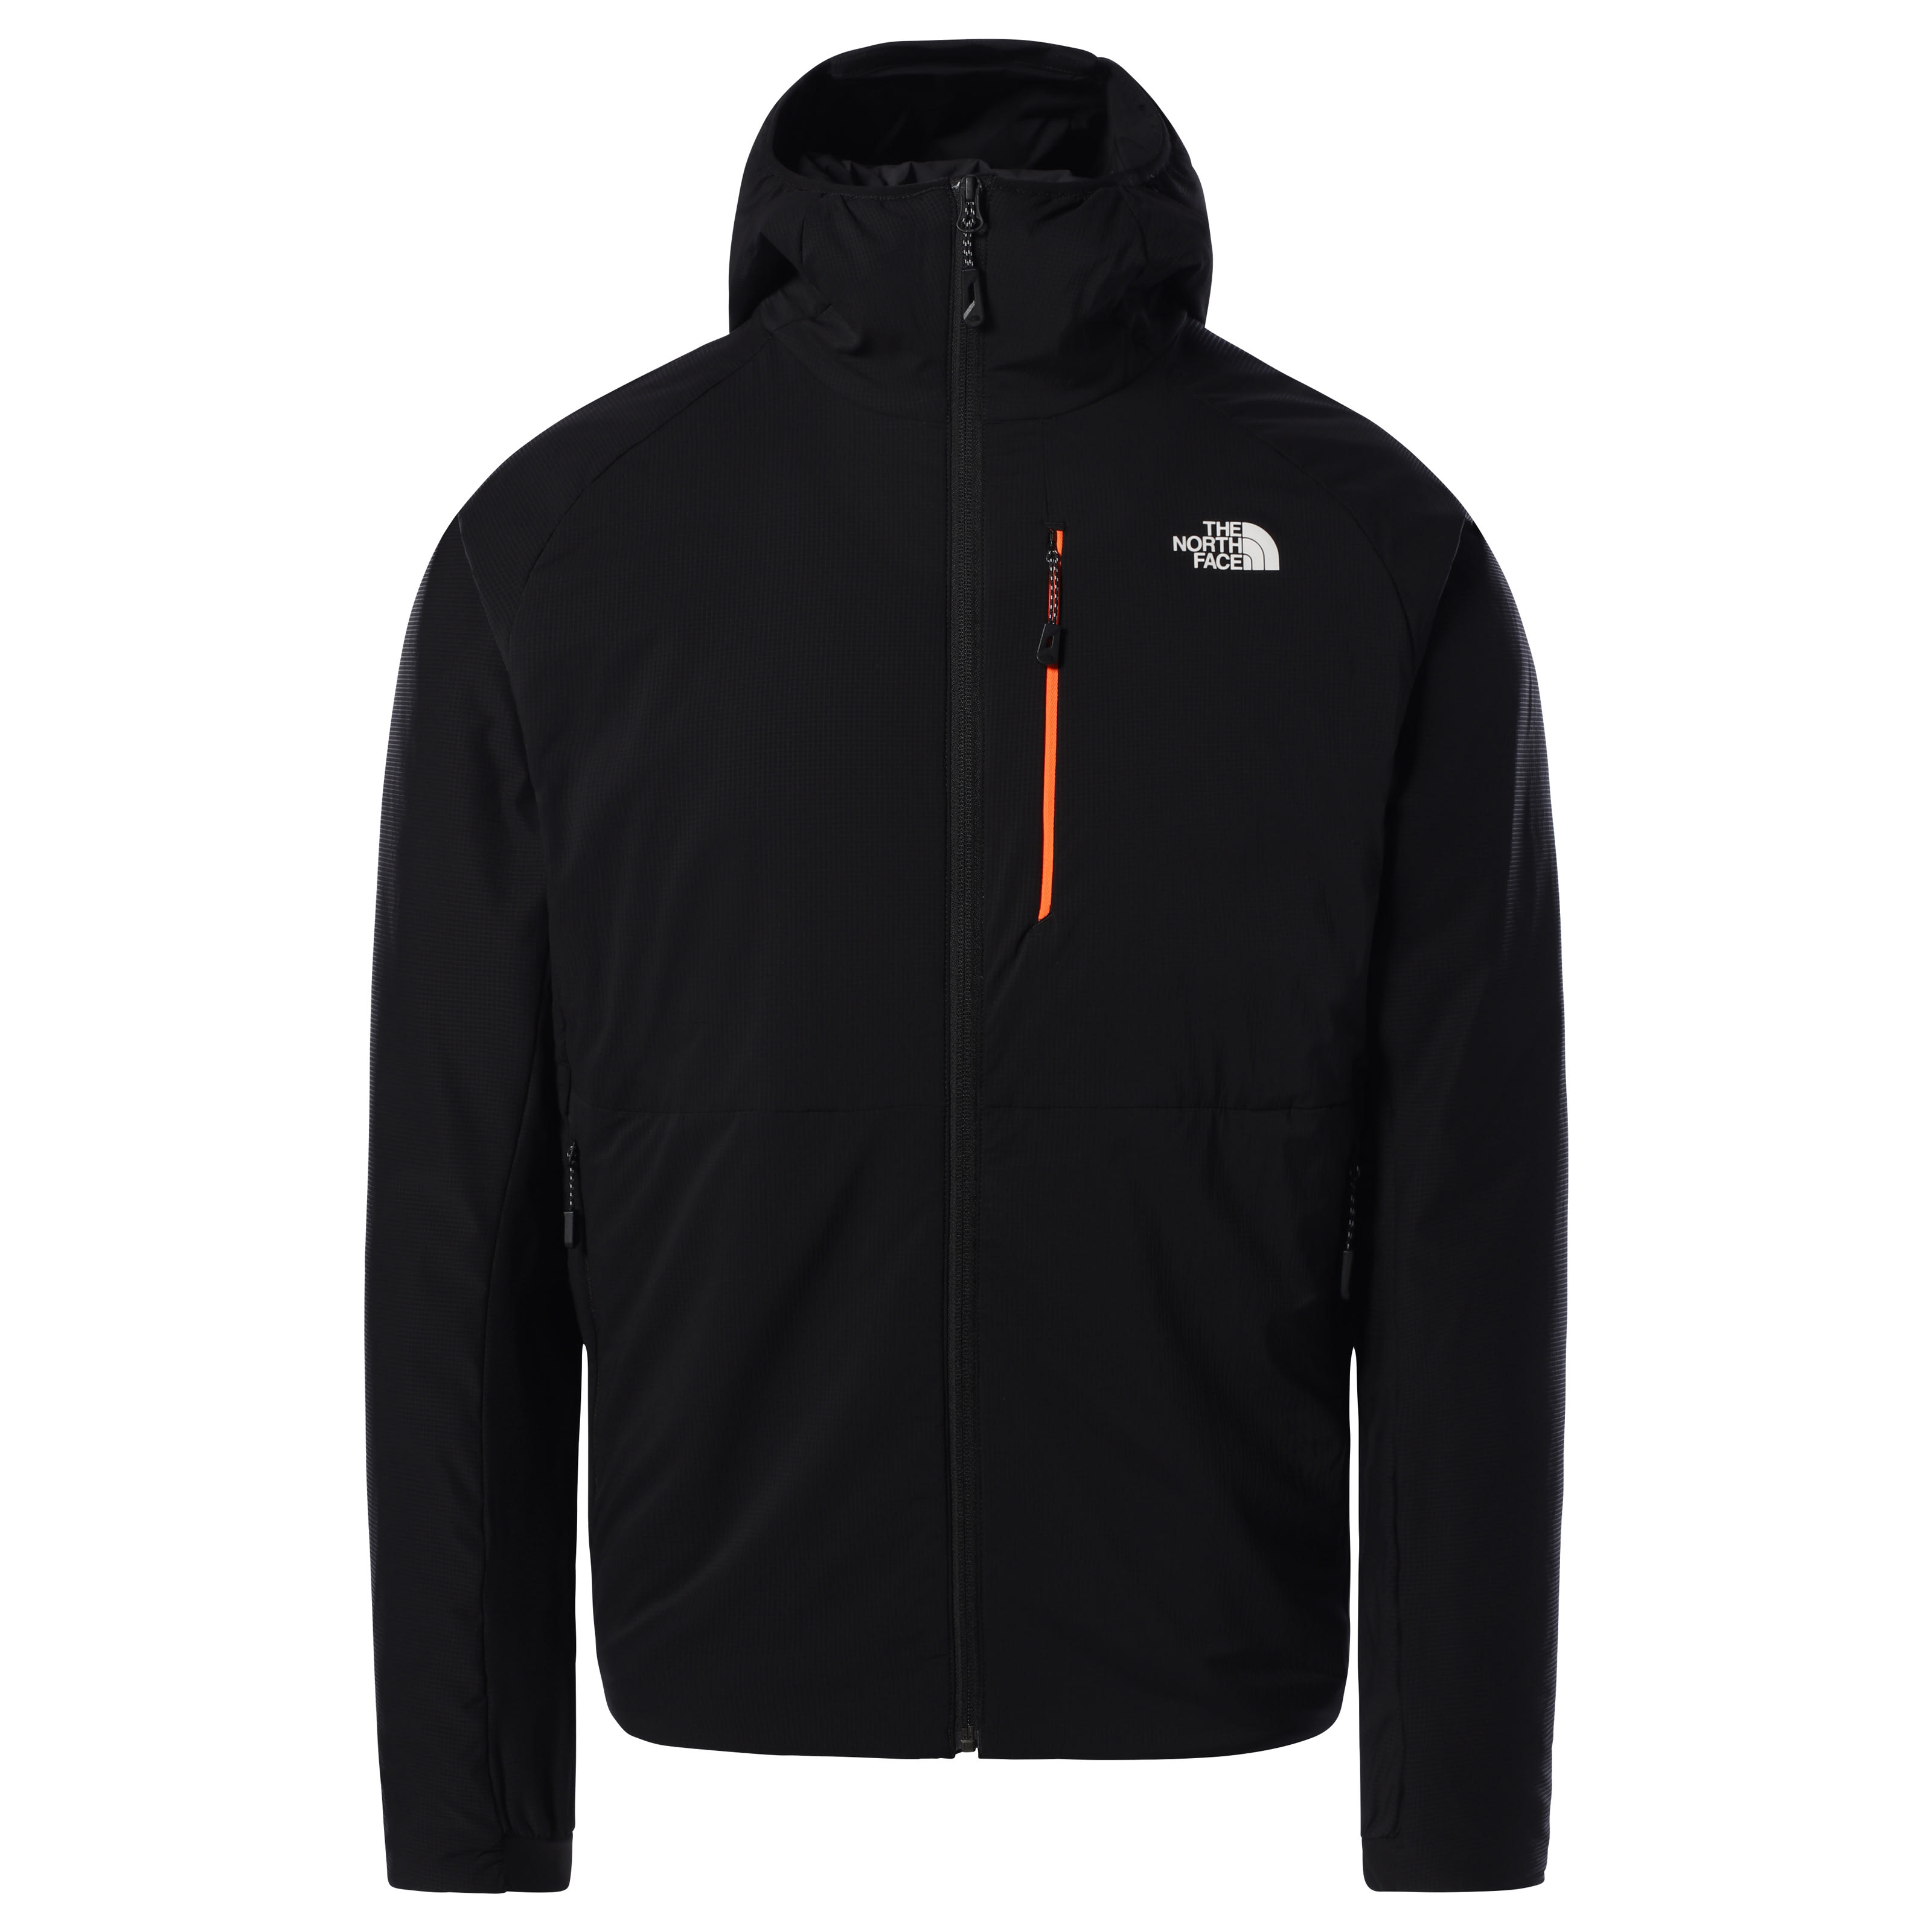 Buy The North Face Men's Circadian Ventrix Hoodie from Outnorth